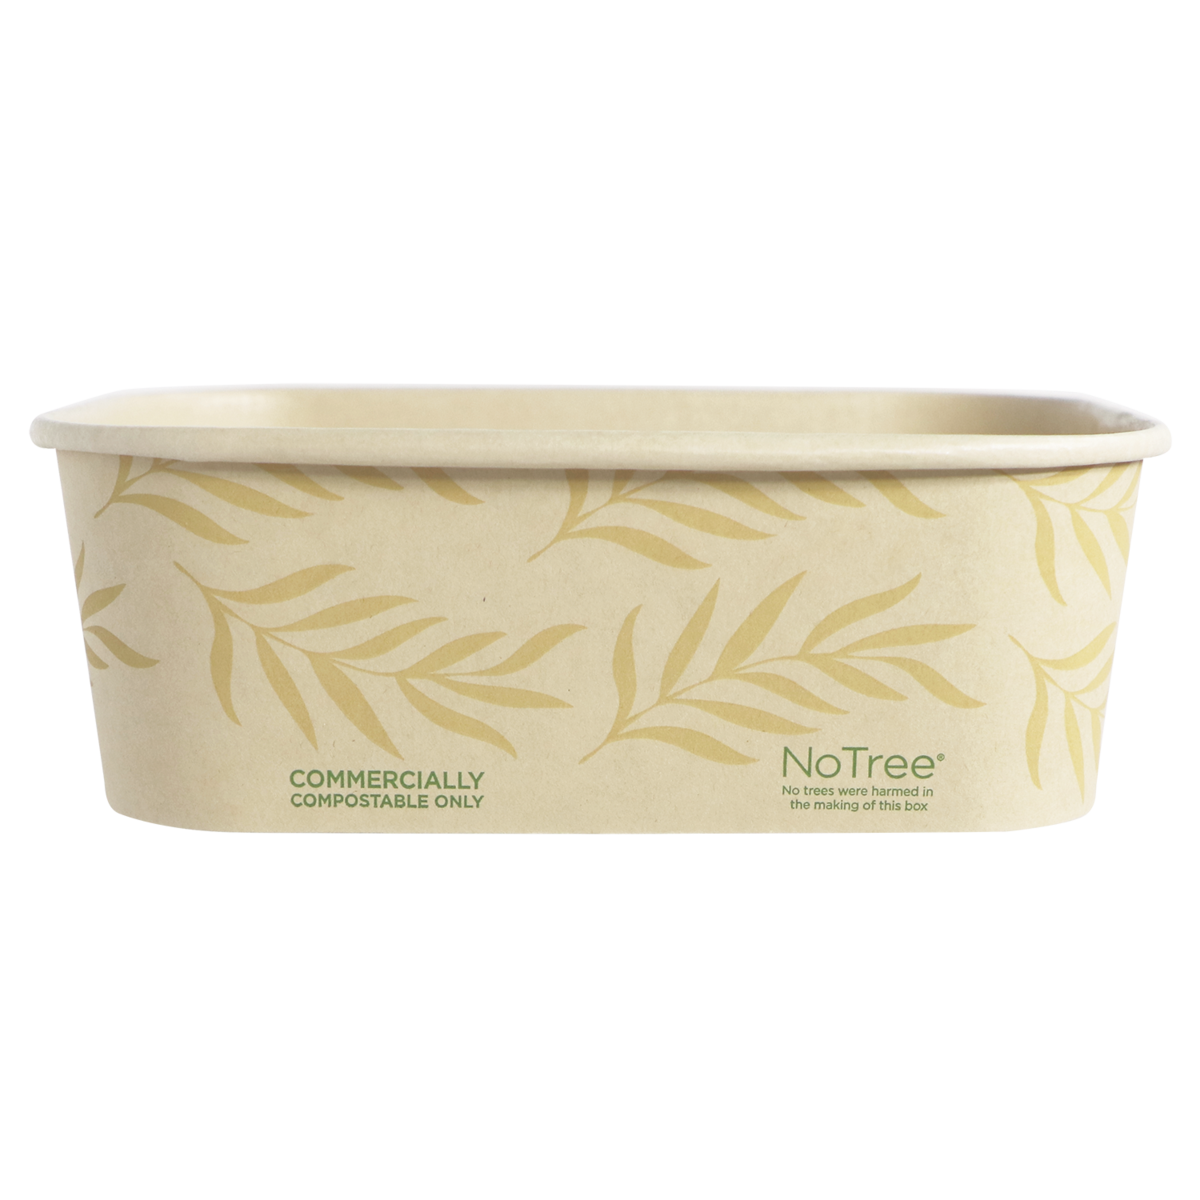 World Centric CT-NT-24 - 24oz NoTree Rectangular Container - Case of 300